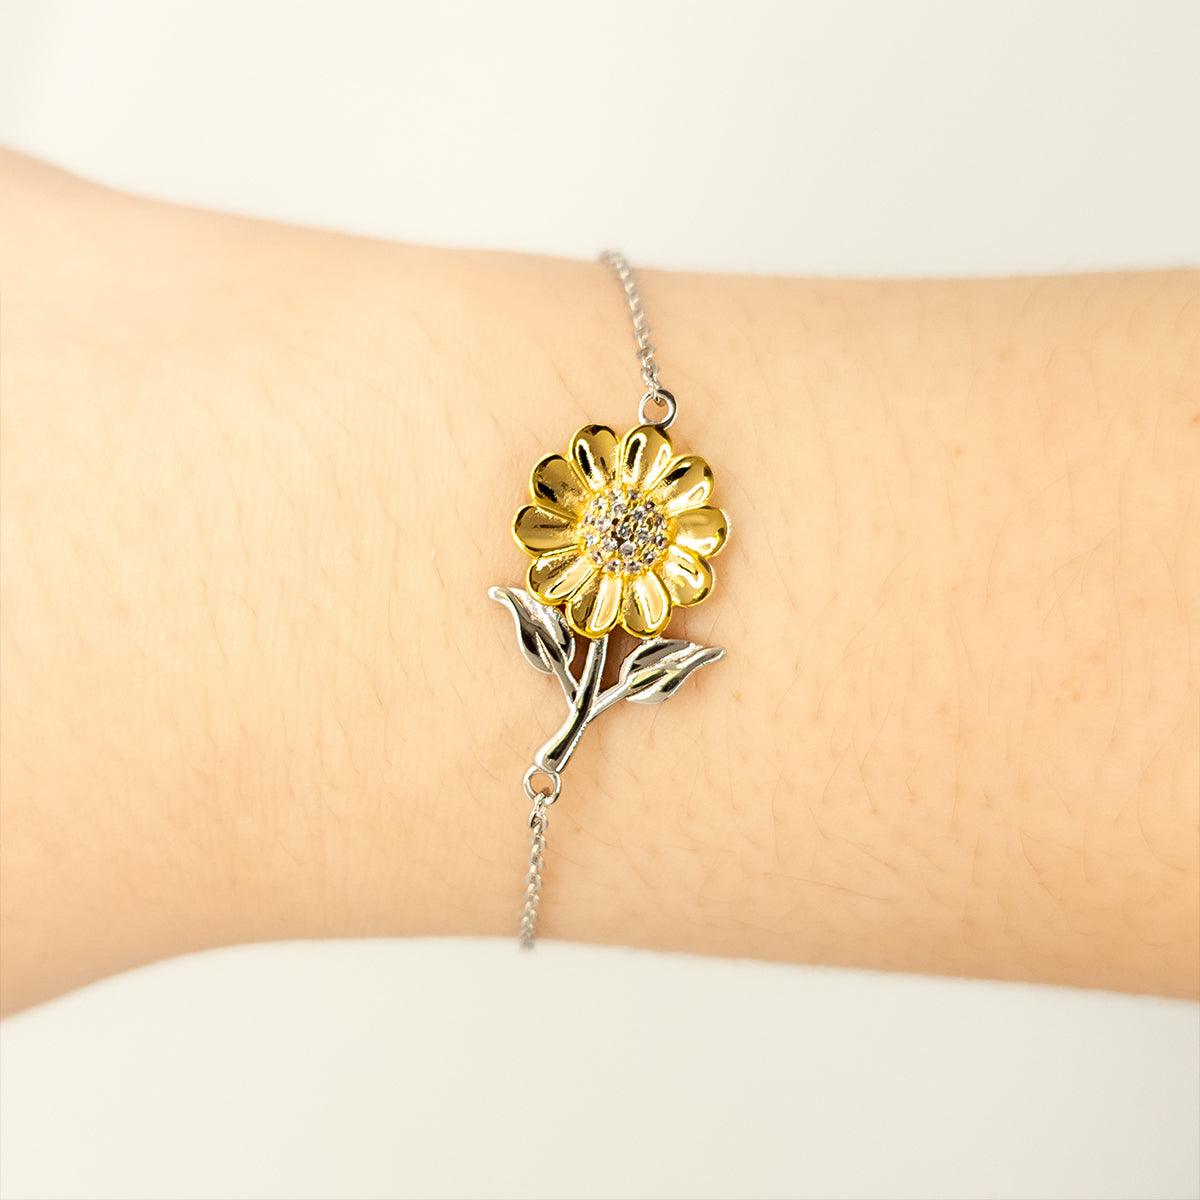 Pharmacy Technician Sunflower Bracelet - Thanks for being who you are - Birthday Christmas Jewelry Gifts Coworkers Colleague Boss - Mallard Moon Gift Shop